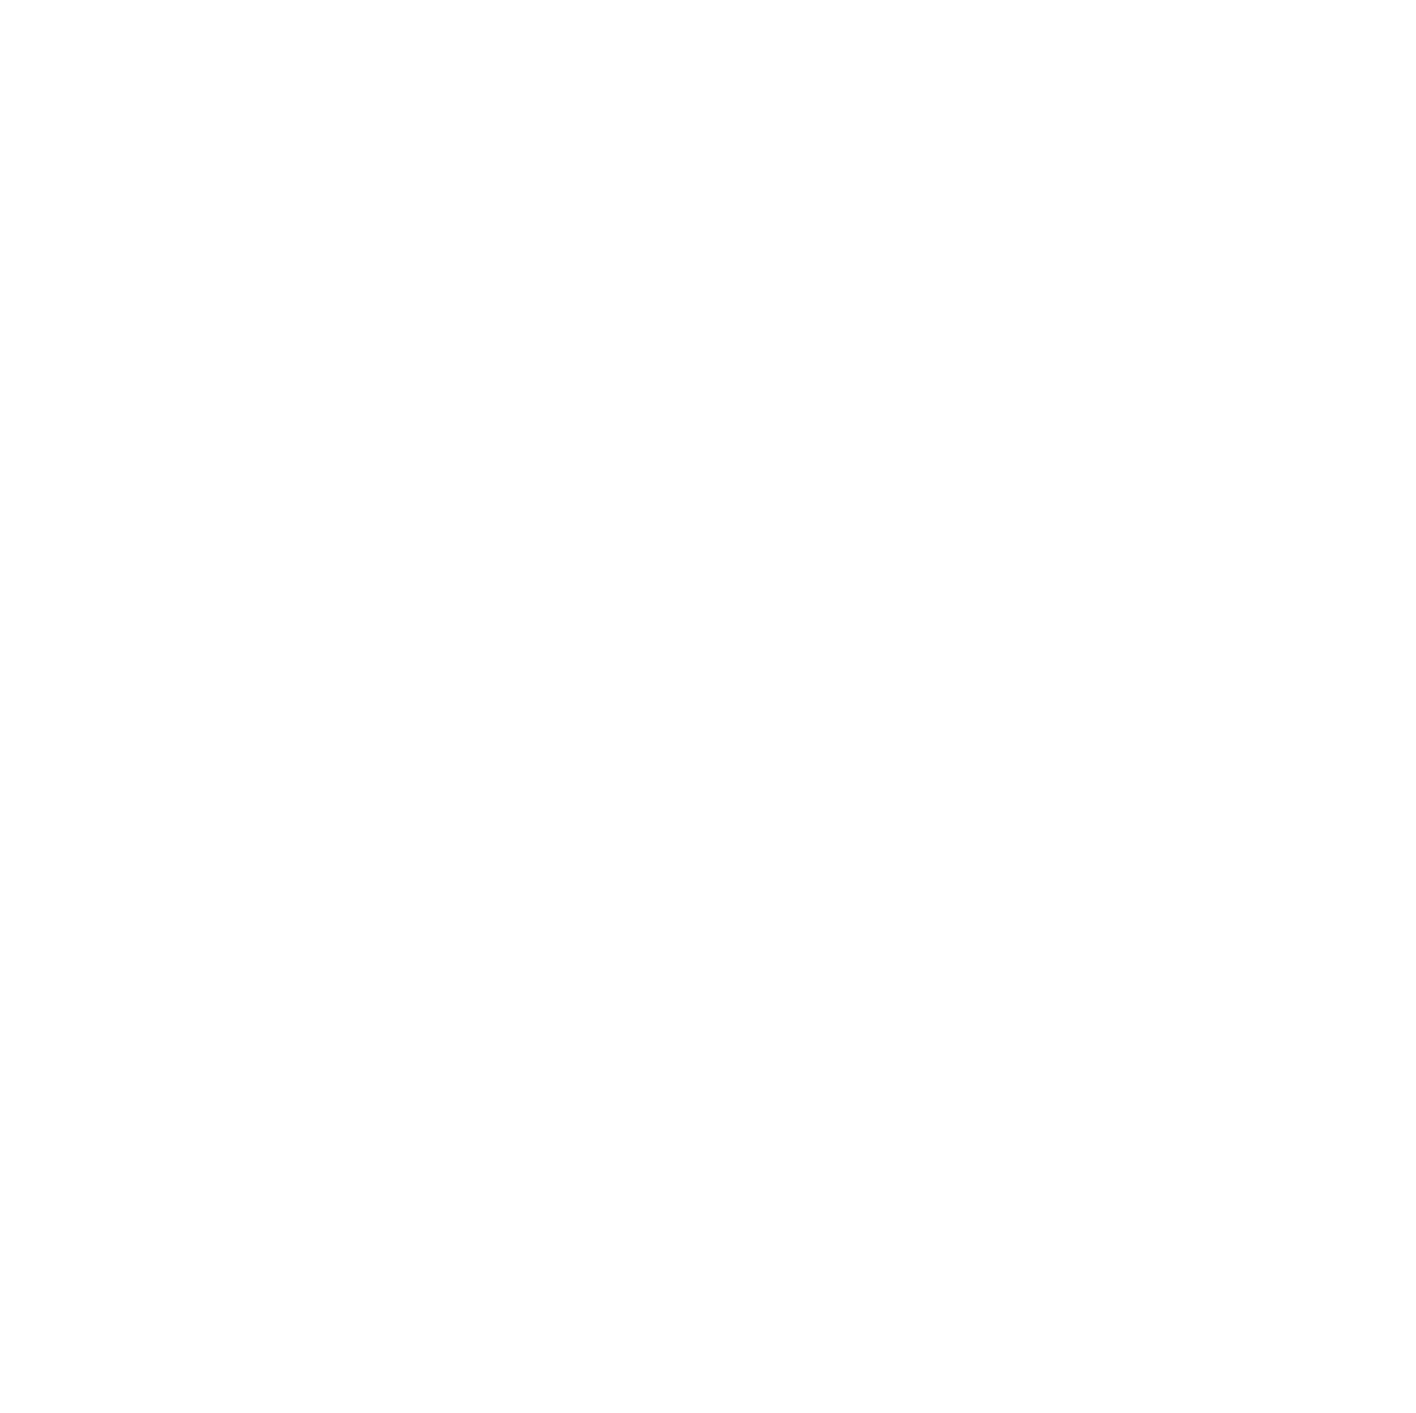 https://brentwoodtreecare.co.uk/wp-content/uploads/2023/03/Brentwood_logo1_white.png